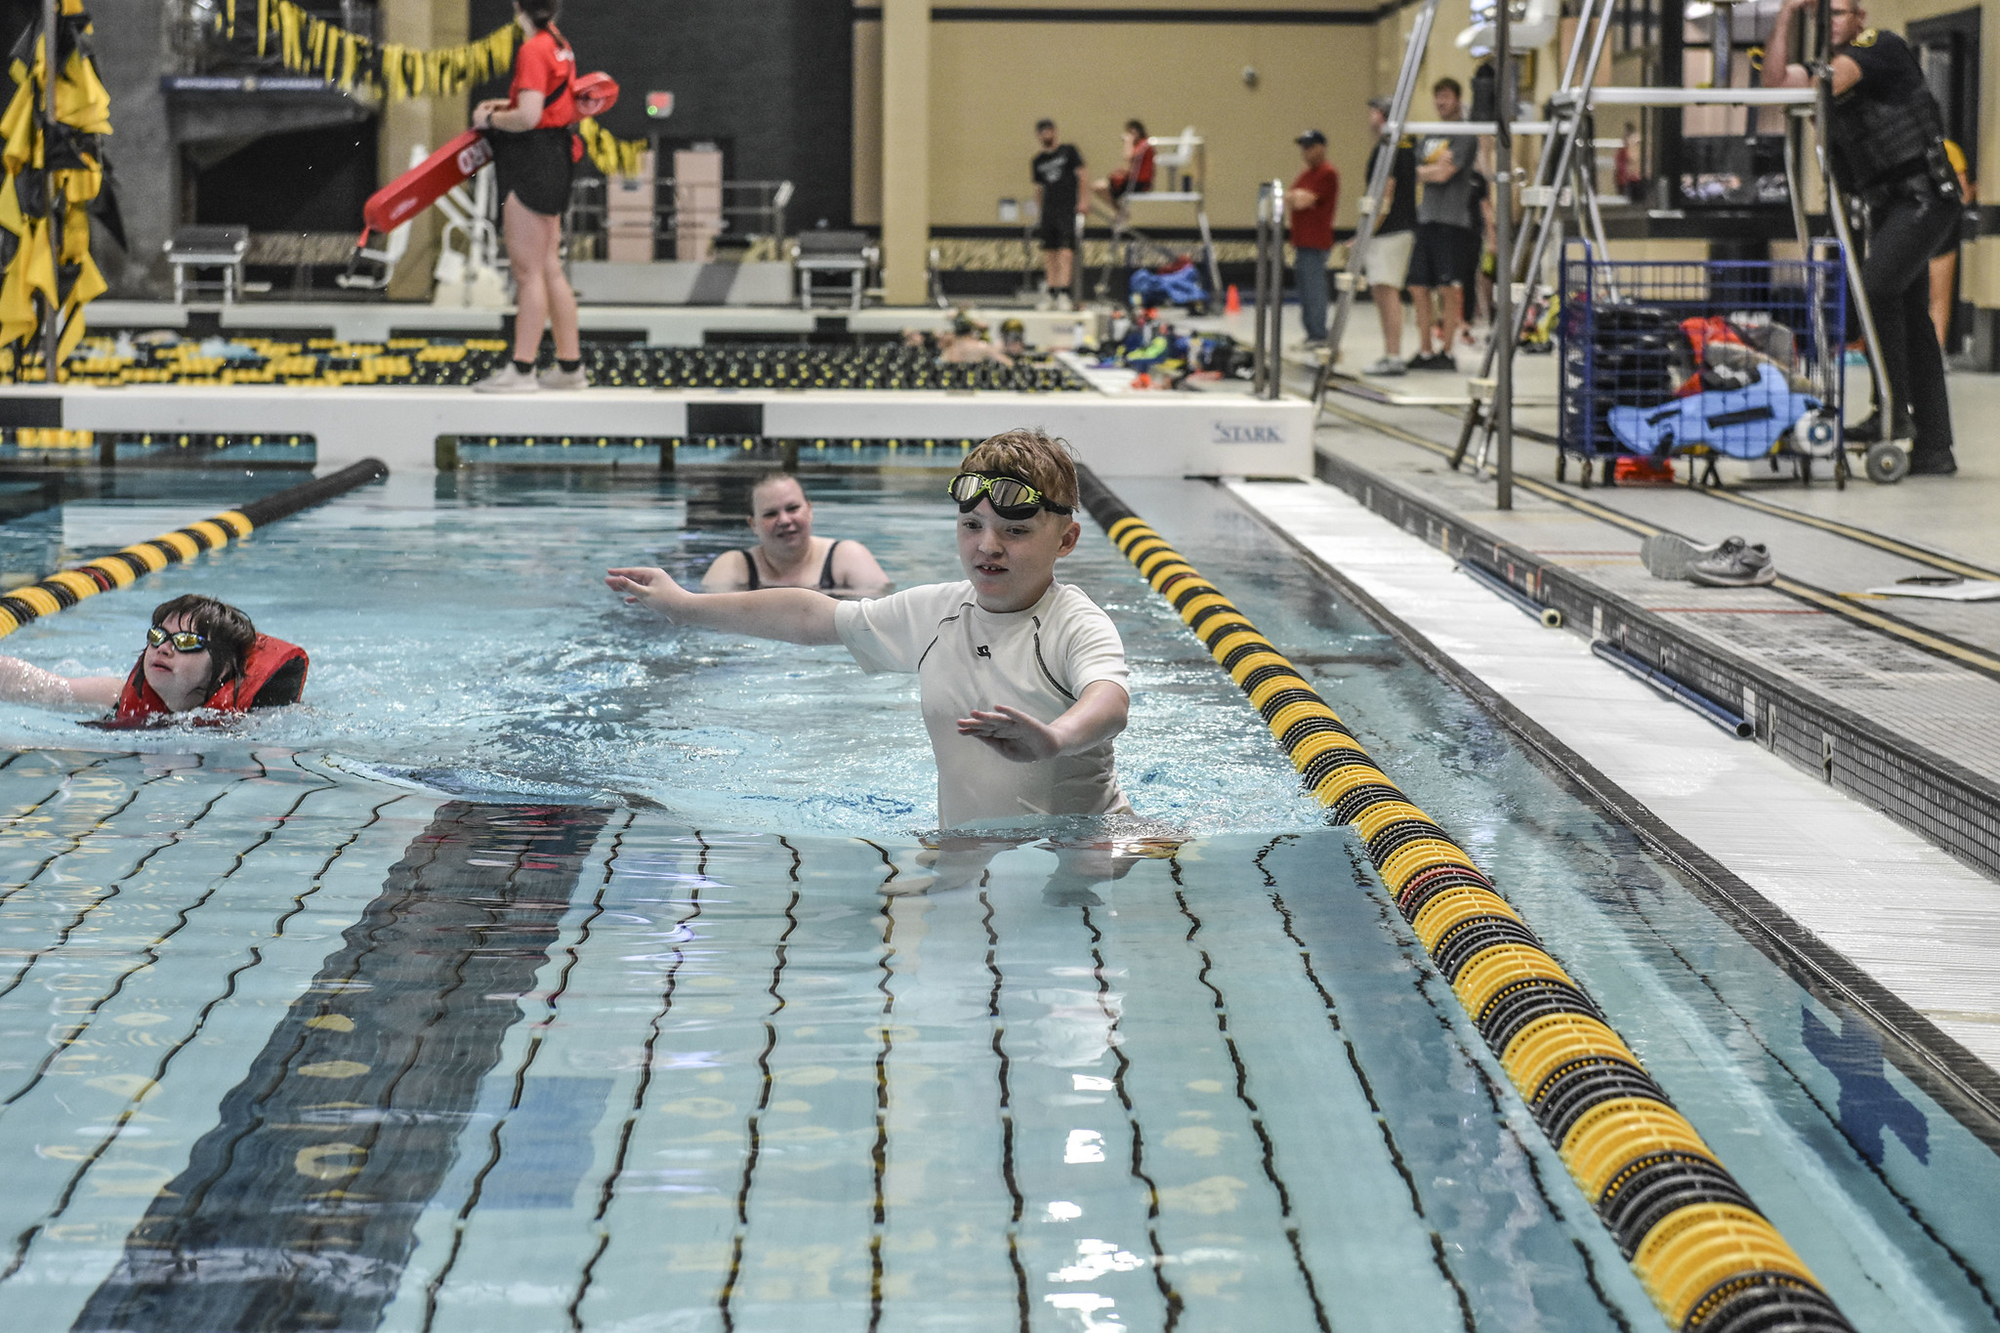 Special Olympics athletes compete in pool at Mizzou Aquatic Complex